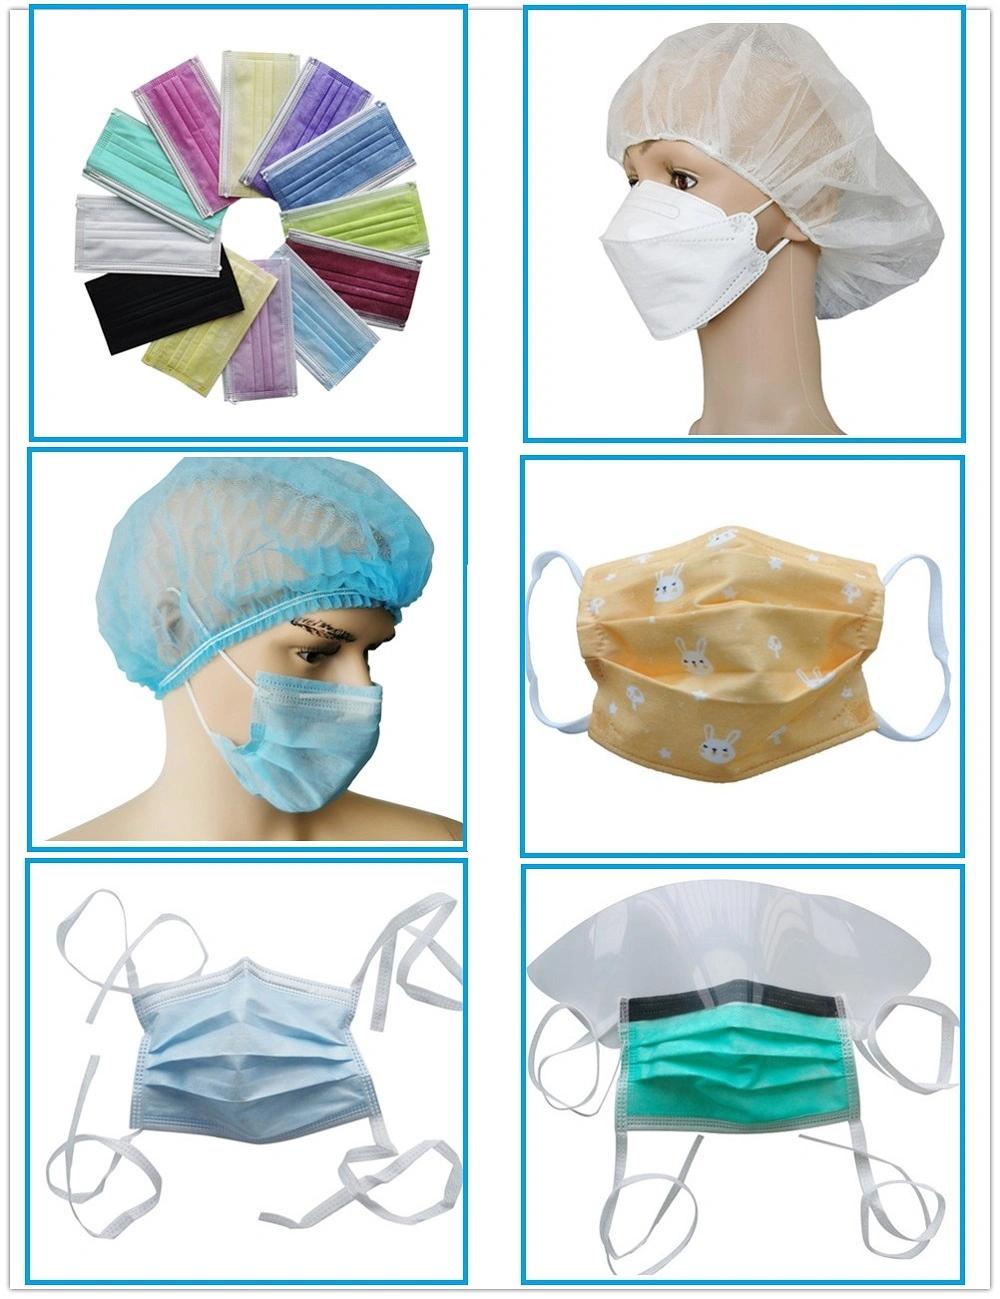 CE Certificated Surgical Mask Manufacturer 3 Plys Type Iir Theater Masks Breathing Filter Anti-Splash Hospital Facial Masks Mask with Ties PP